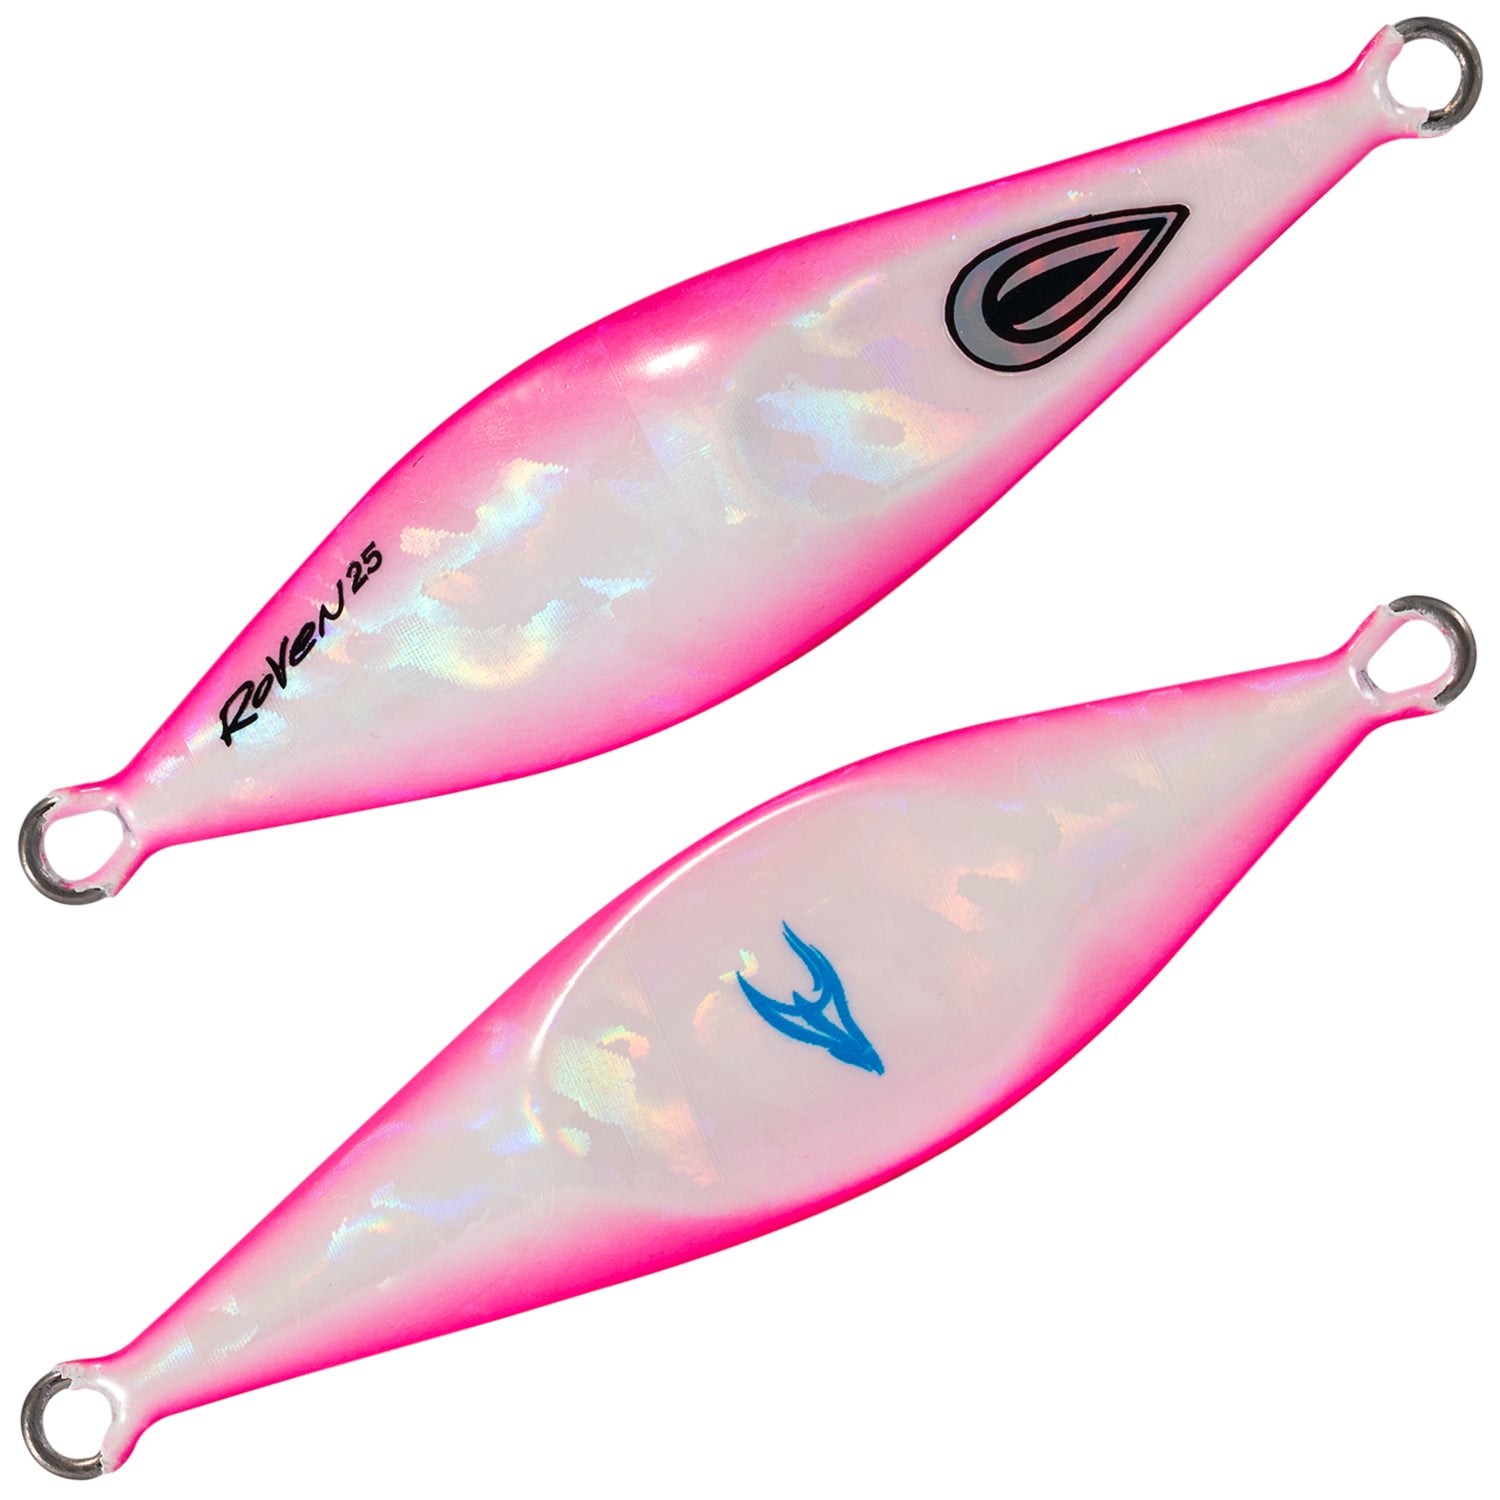 Oceans Legacy Roven Jig Rigged 15g 8